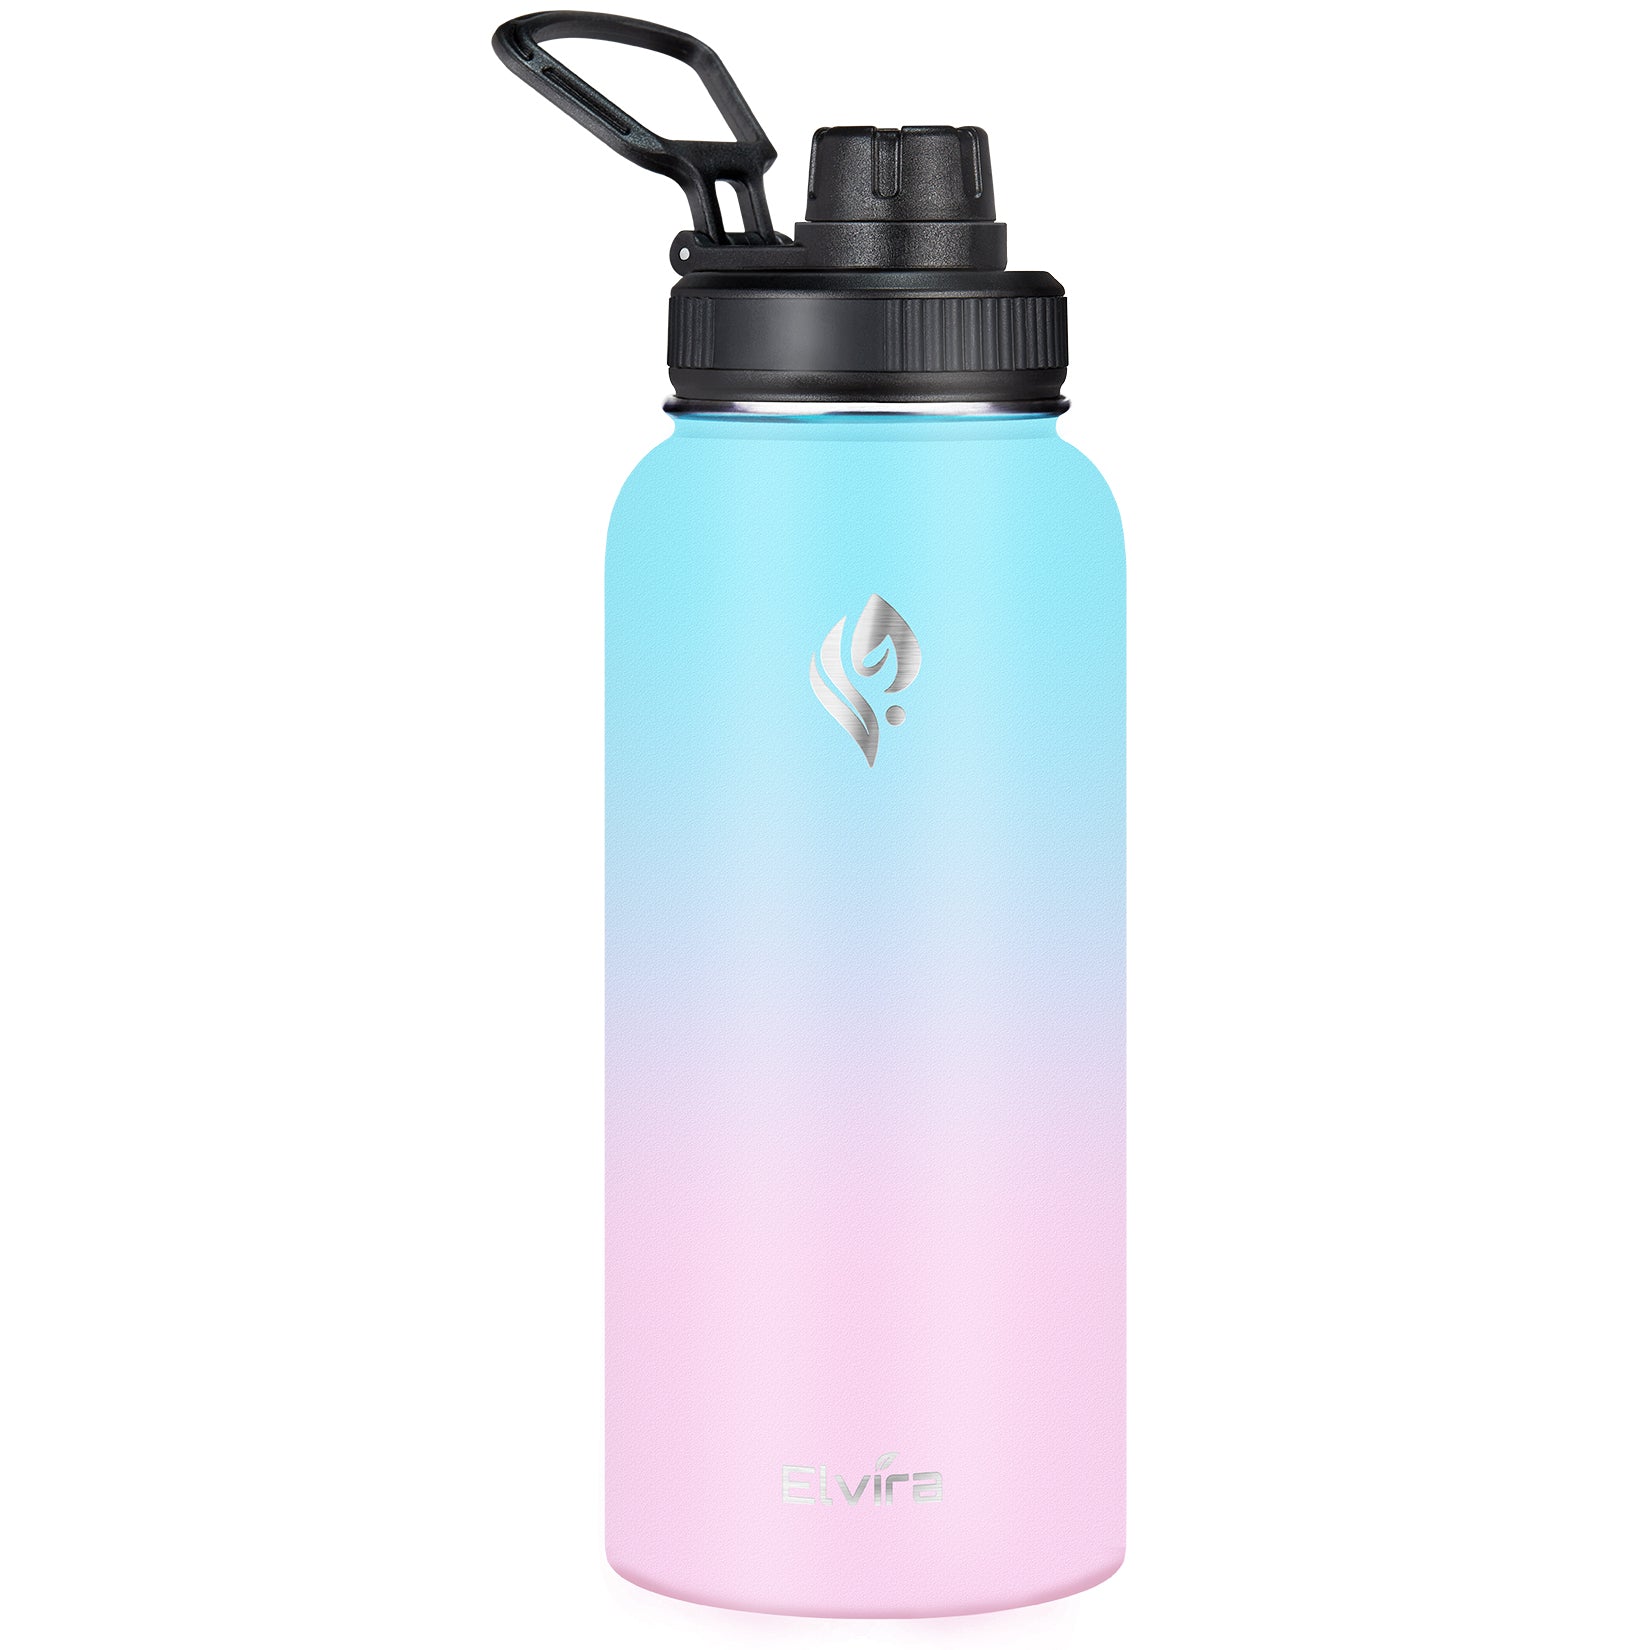 Smartlee Insulated Water Bottle with Straw & Spout Lid - 32oz Light Blue  Pink